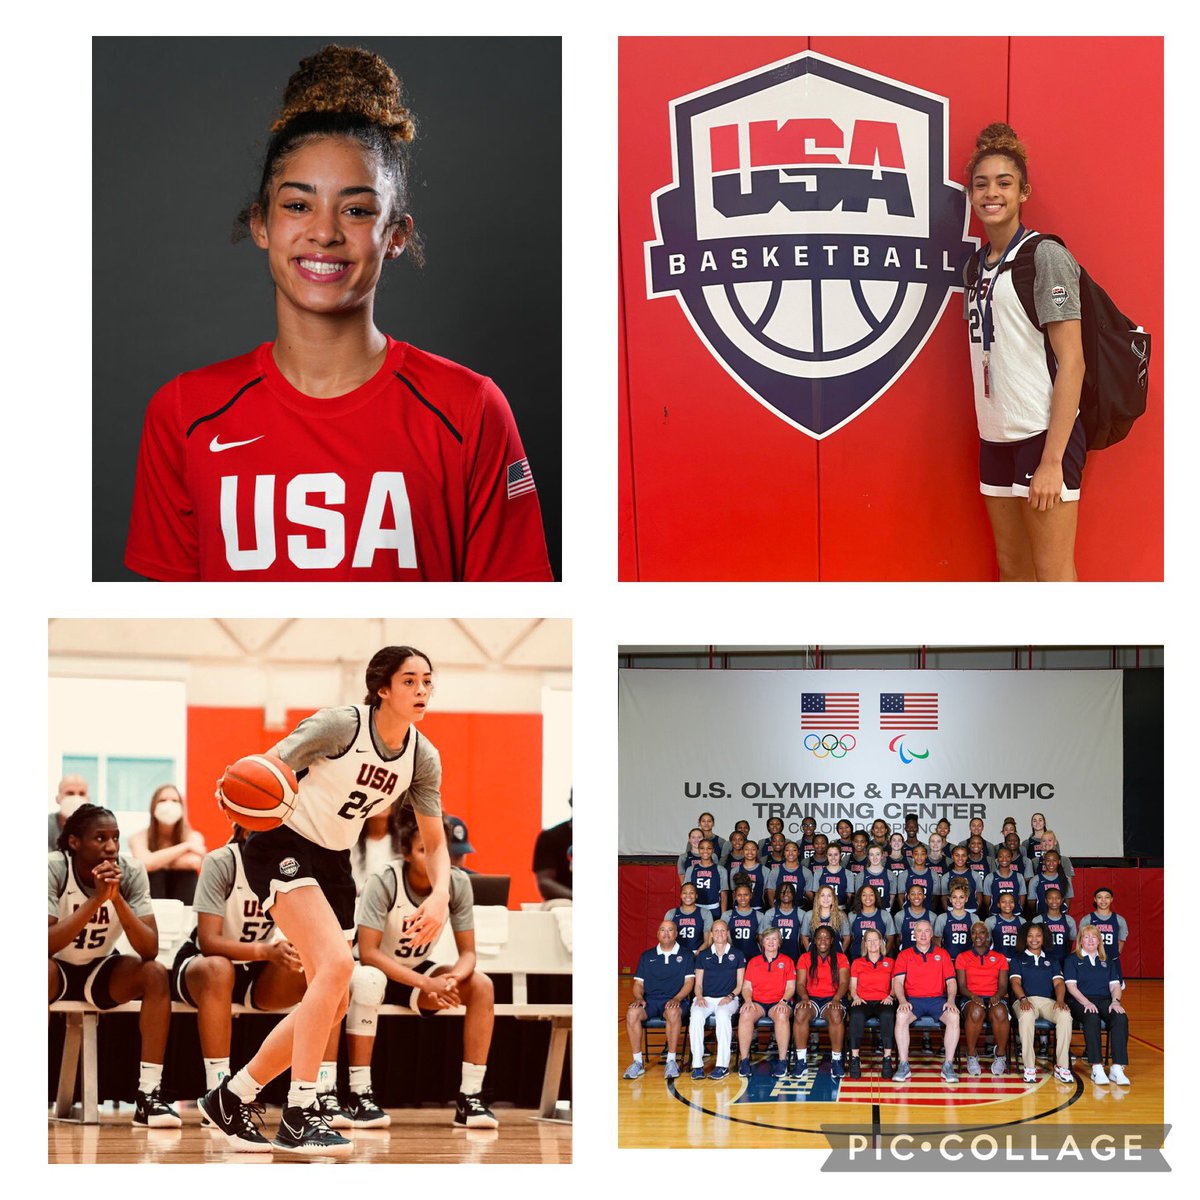 So thankful to @usabjnt for this amazing opportunity! Honored to wear my USA jersey while competing against the best of the best every day! Good luck to the remaining finalists and GO USA! 🇺🇸🏀 #u17trials